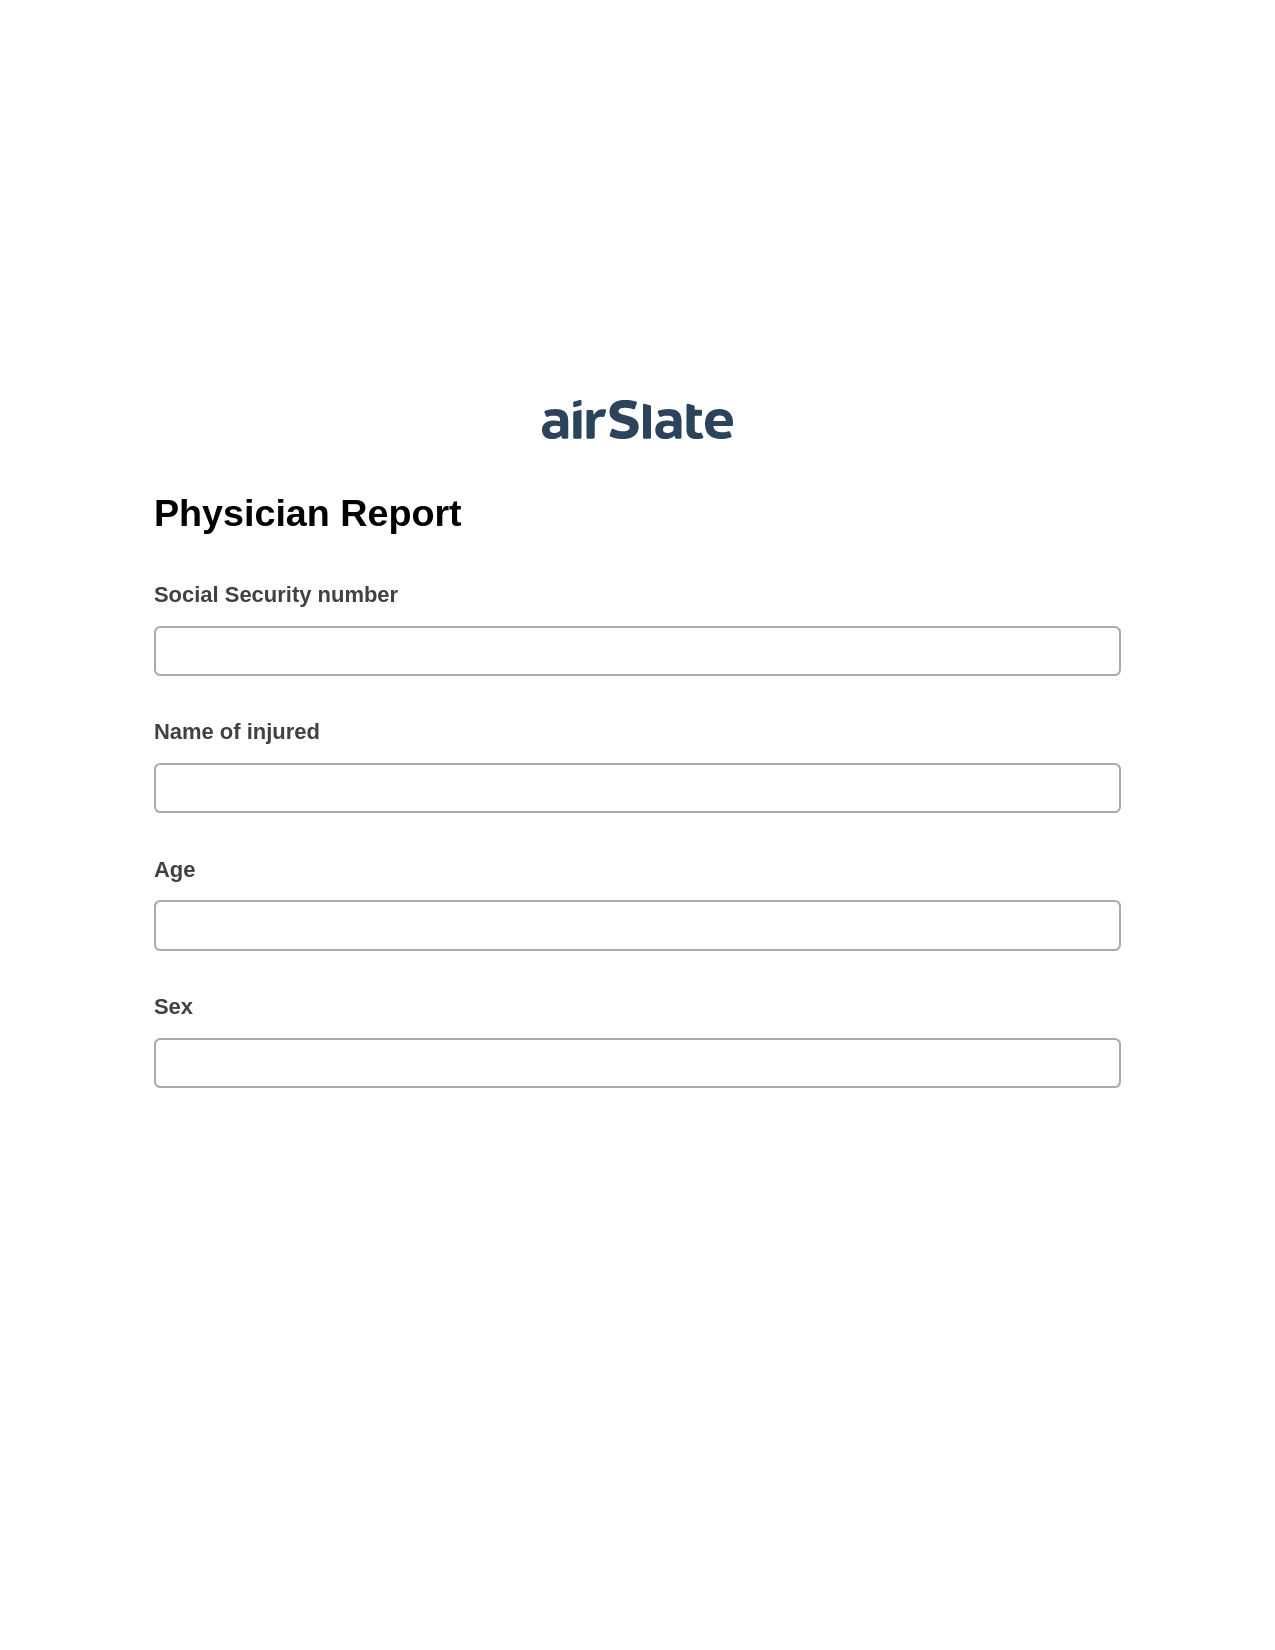 Physician Report Pre-fill Dropdowns from MySQL Bot, Unassign Role Bot, Export to WebMerge Bot